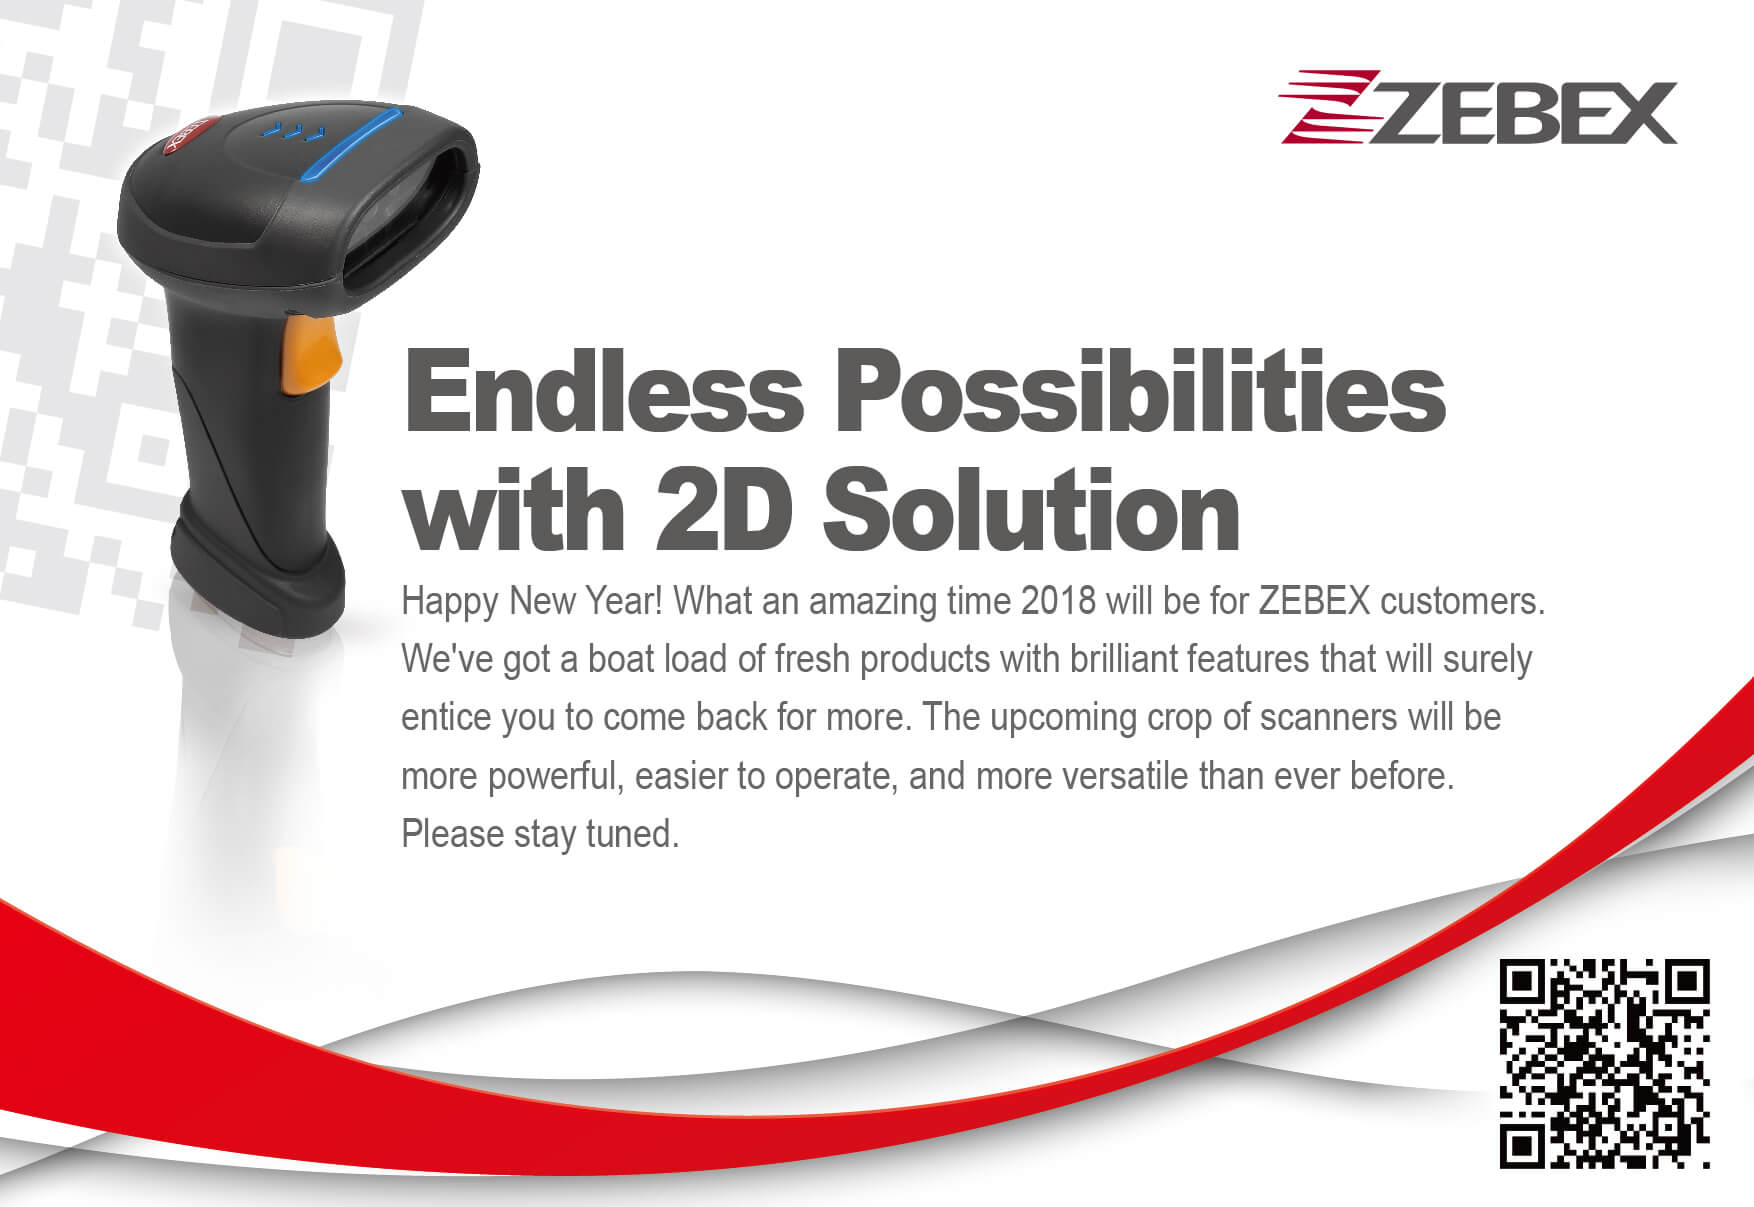 ZEBEX,Z-3392 Plus,Endless_possibilities_with_2D_solution